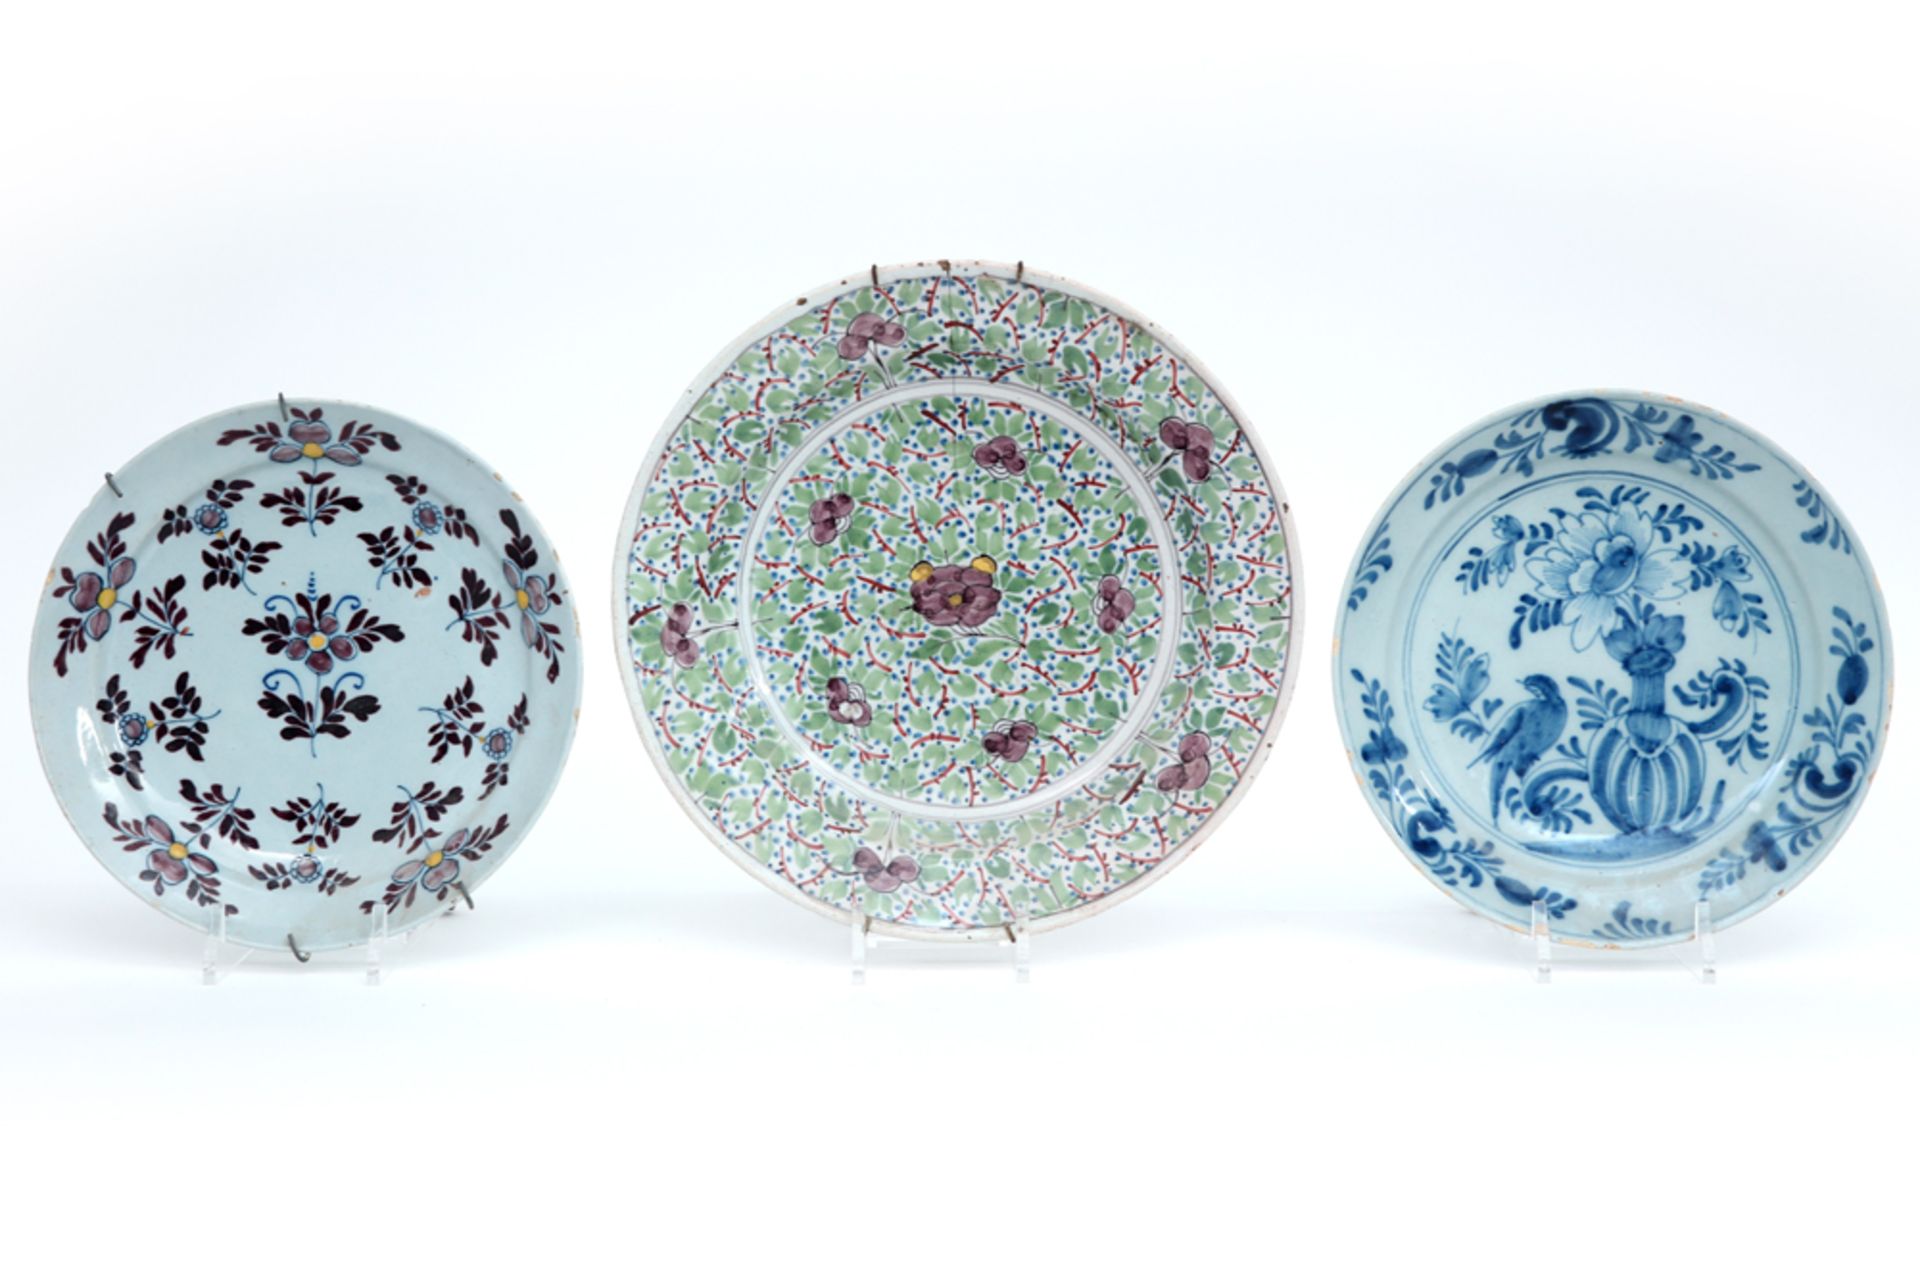 three antique ceramic dishes from Delft and Brussels || Lot (3) antieke faïence uit Delft en Brussel